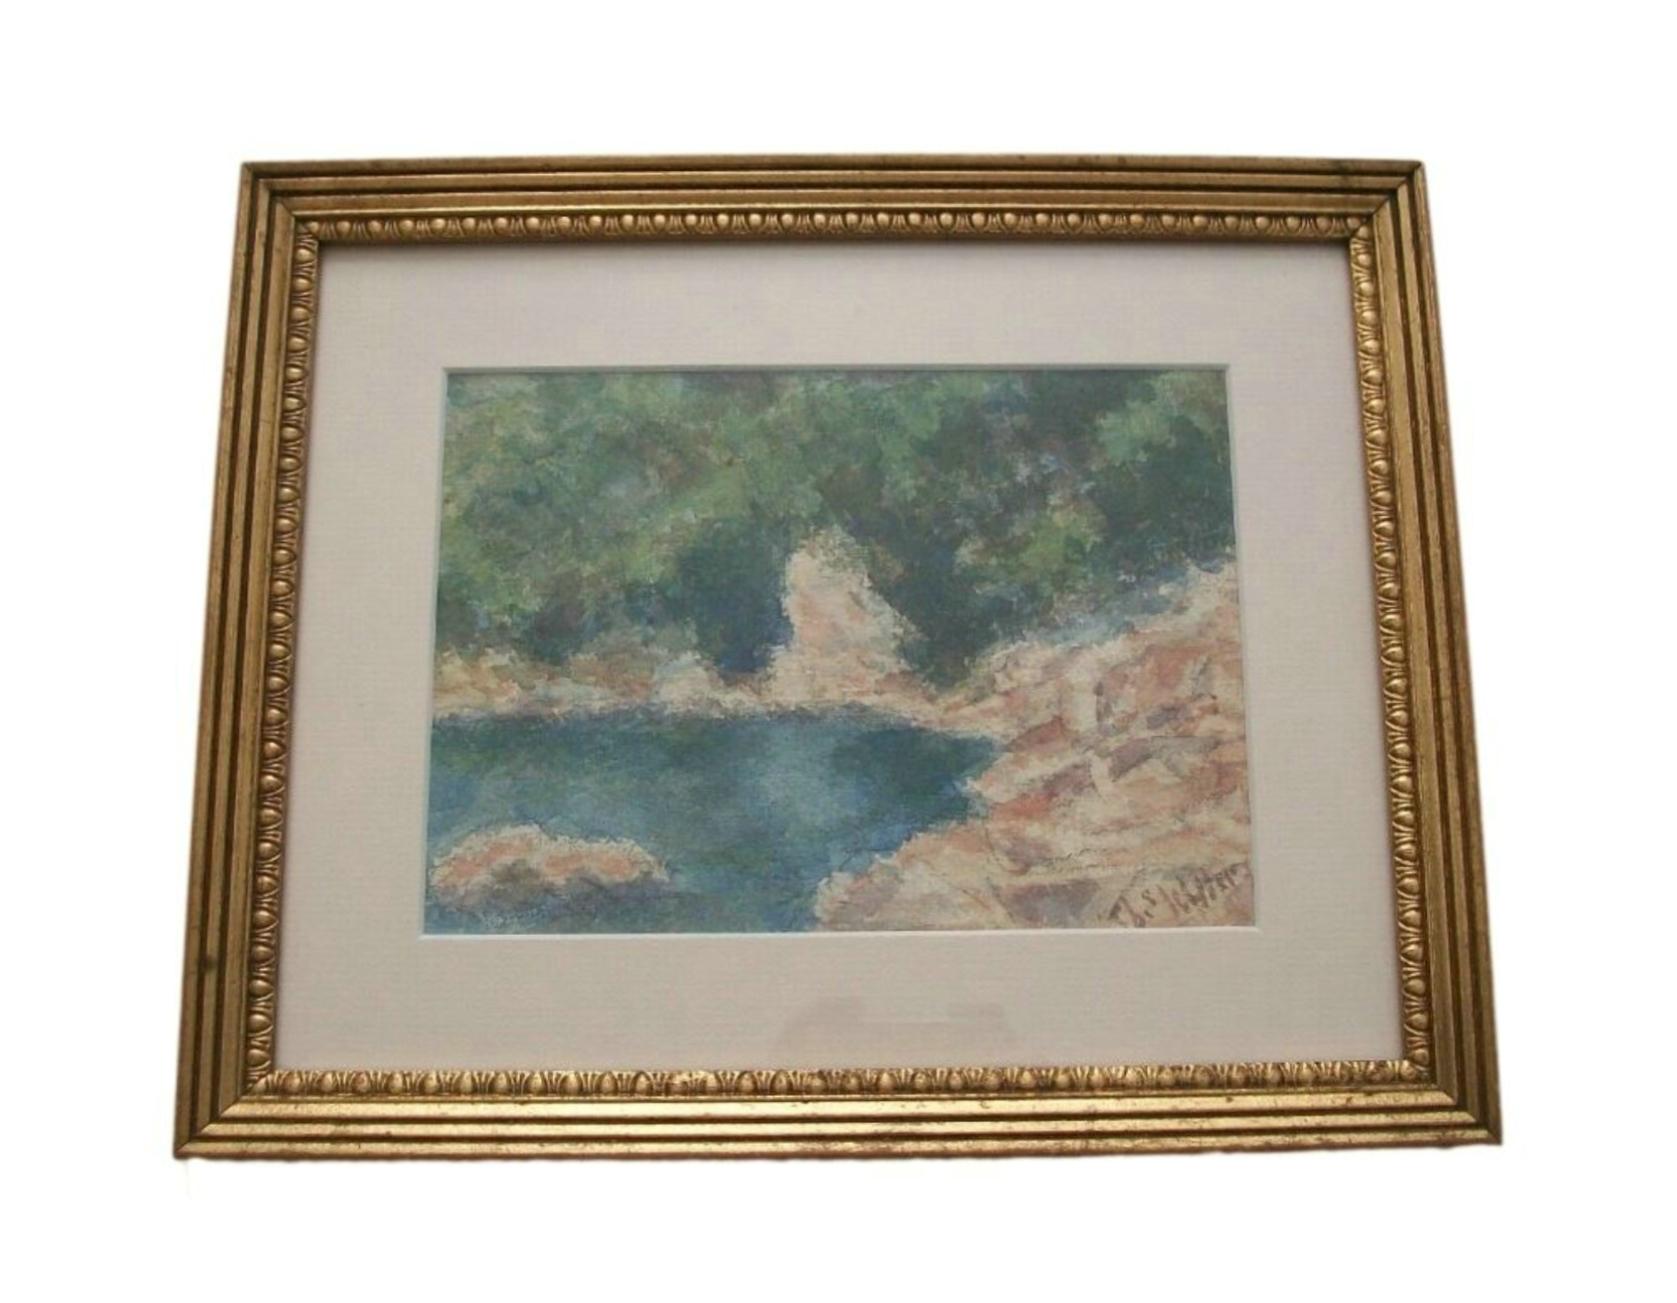 Eugene White - 'Untitled' - Impressionist watercolor landscape painting (over graphite) - vintage single matte board (acid free) - vintage gilt-wood frame with glass - signed and dated lower right - United States (Sarasota - Florida) - circa 1956.